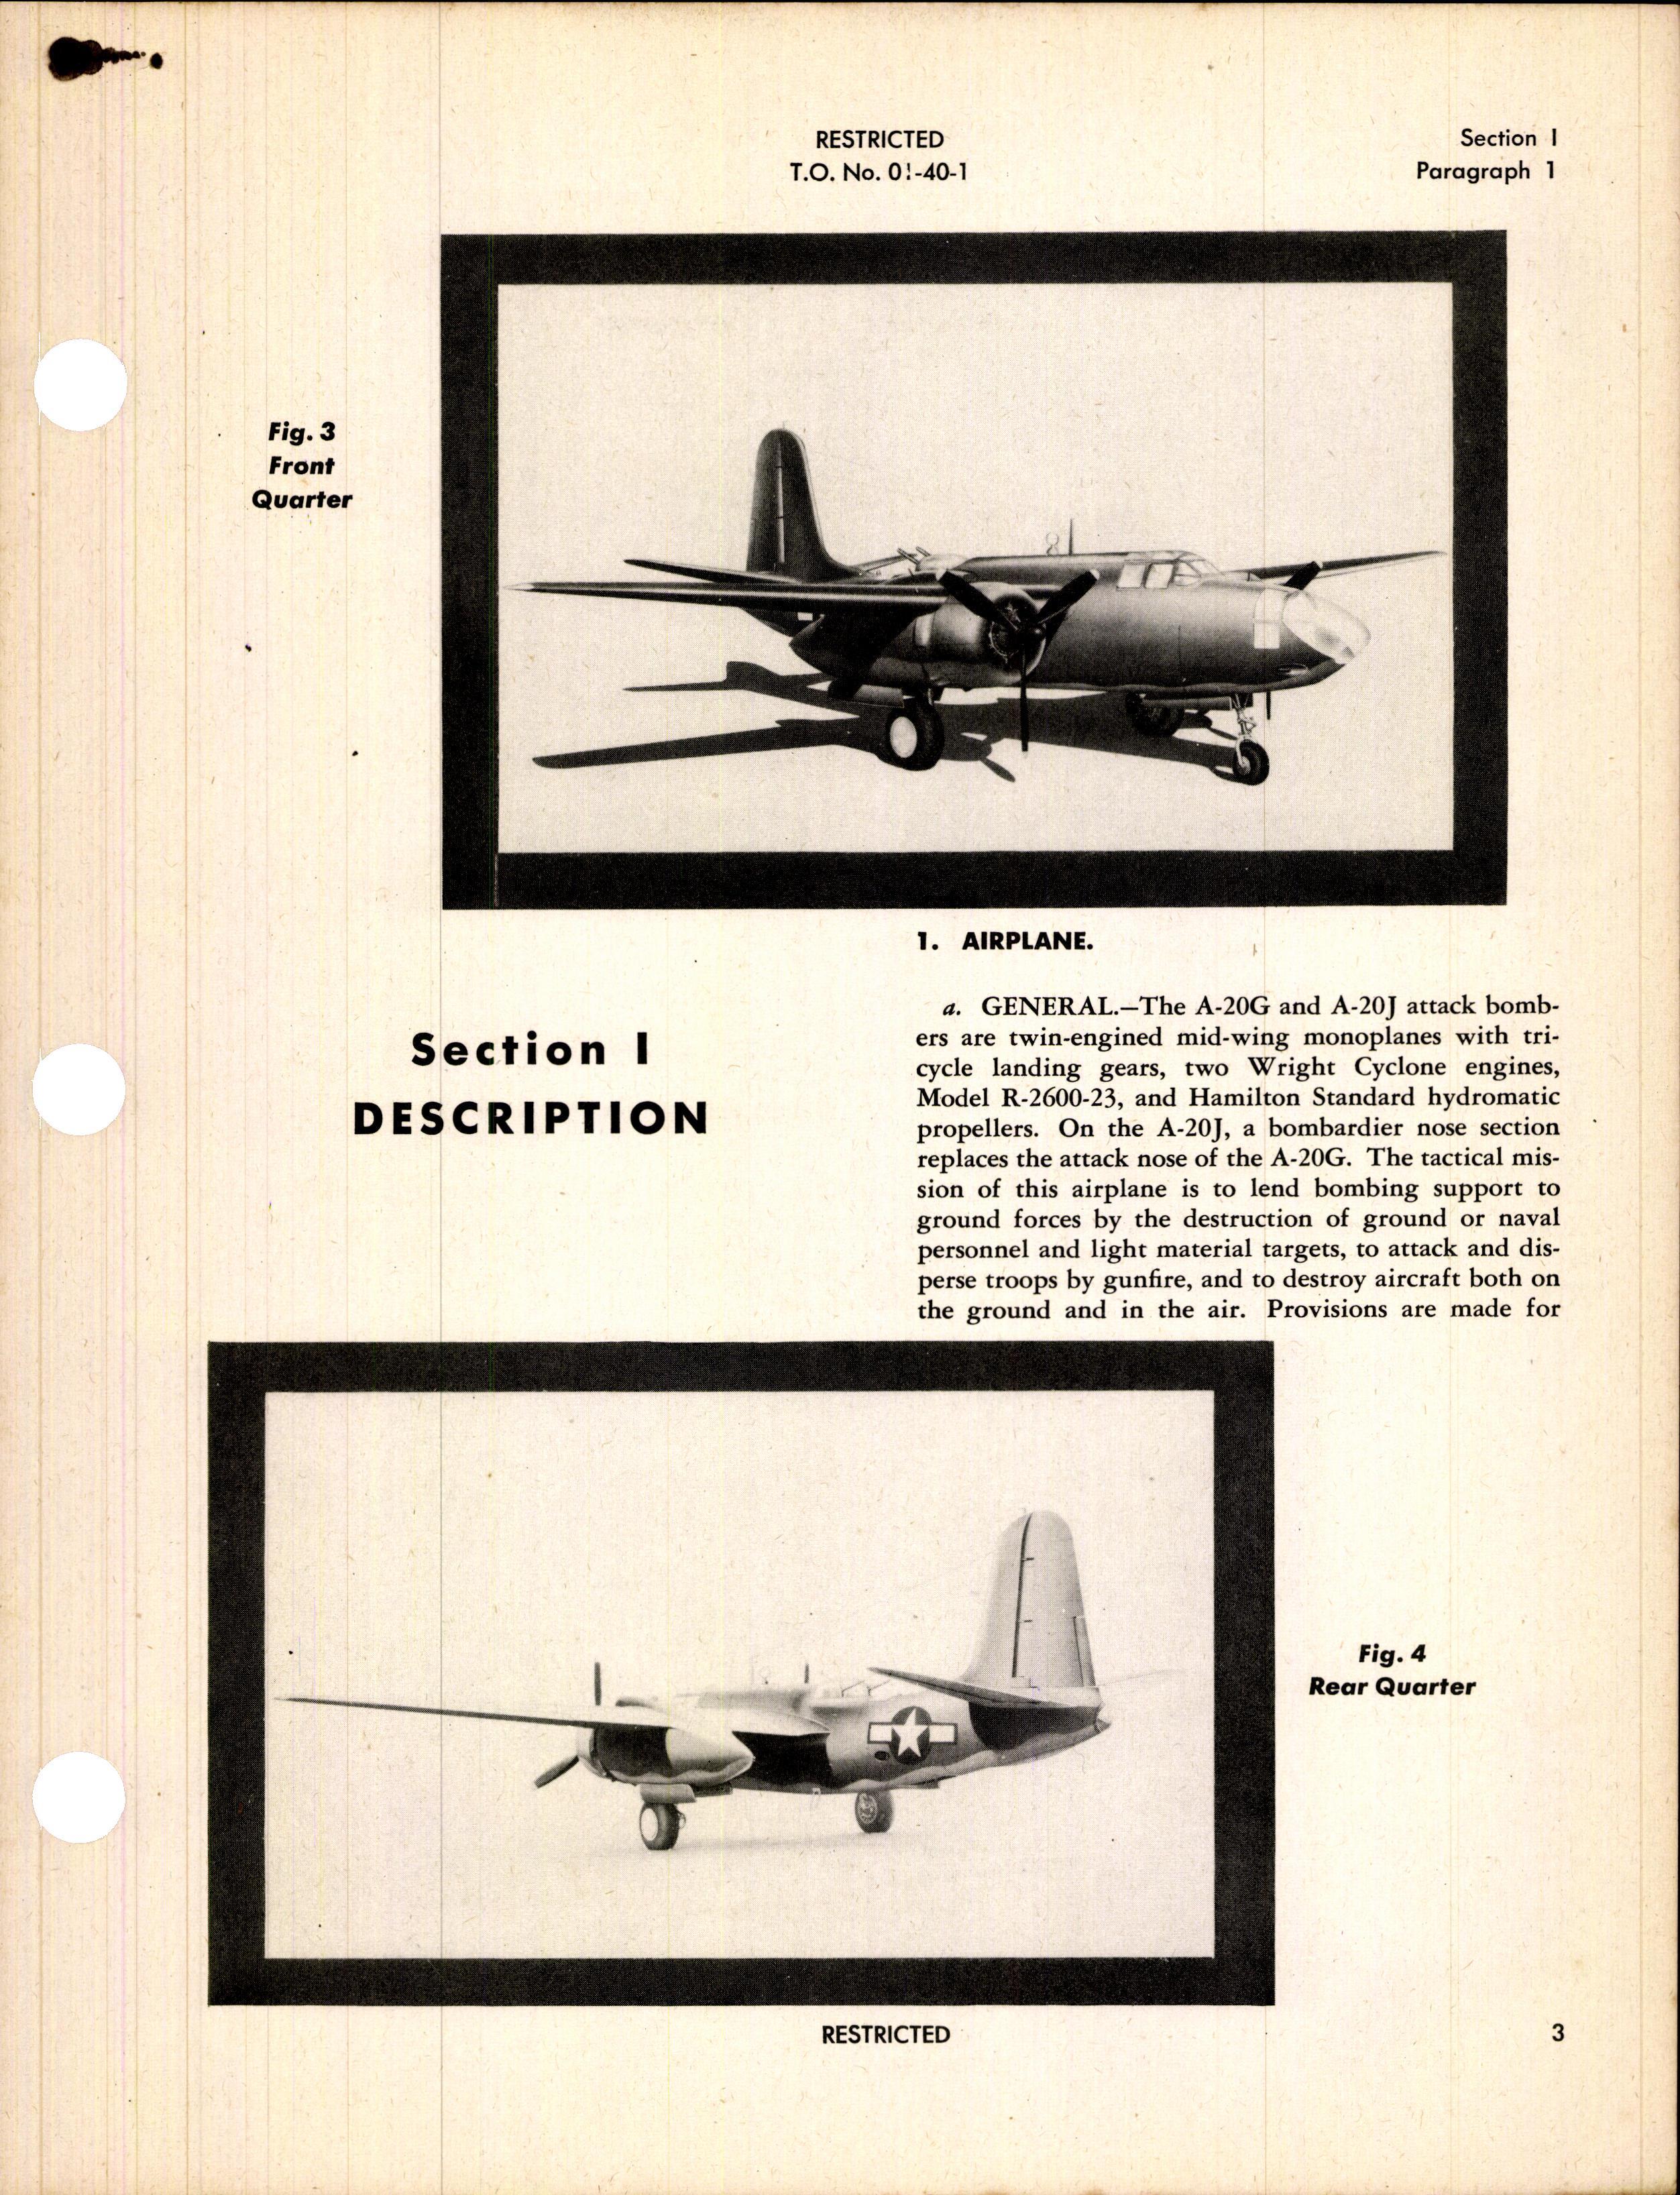 Sample page 5 from AirCorps Library document: Pilot's Flight Operating Instructions for A-20G, A-20J Series, P-70A-2, and P-70B-2